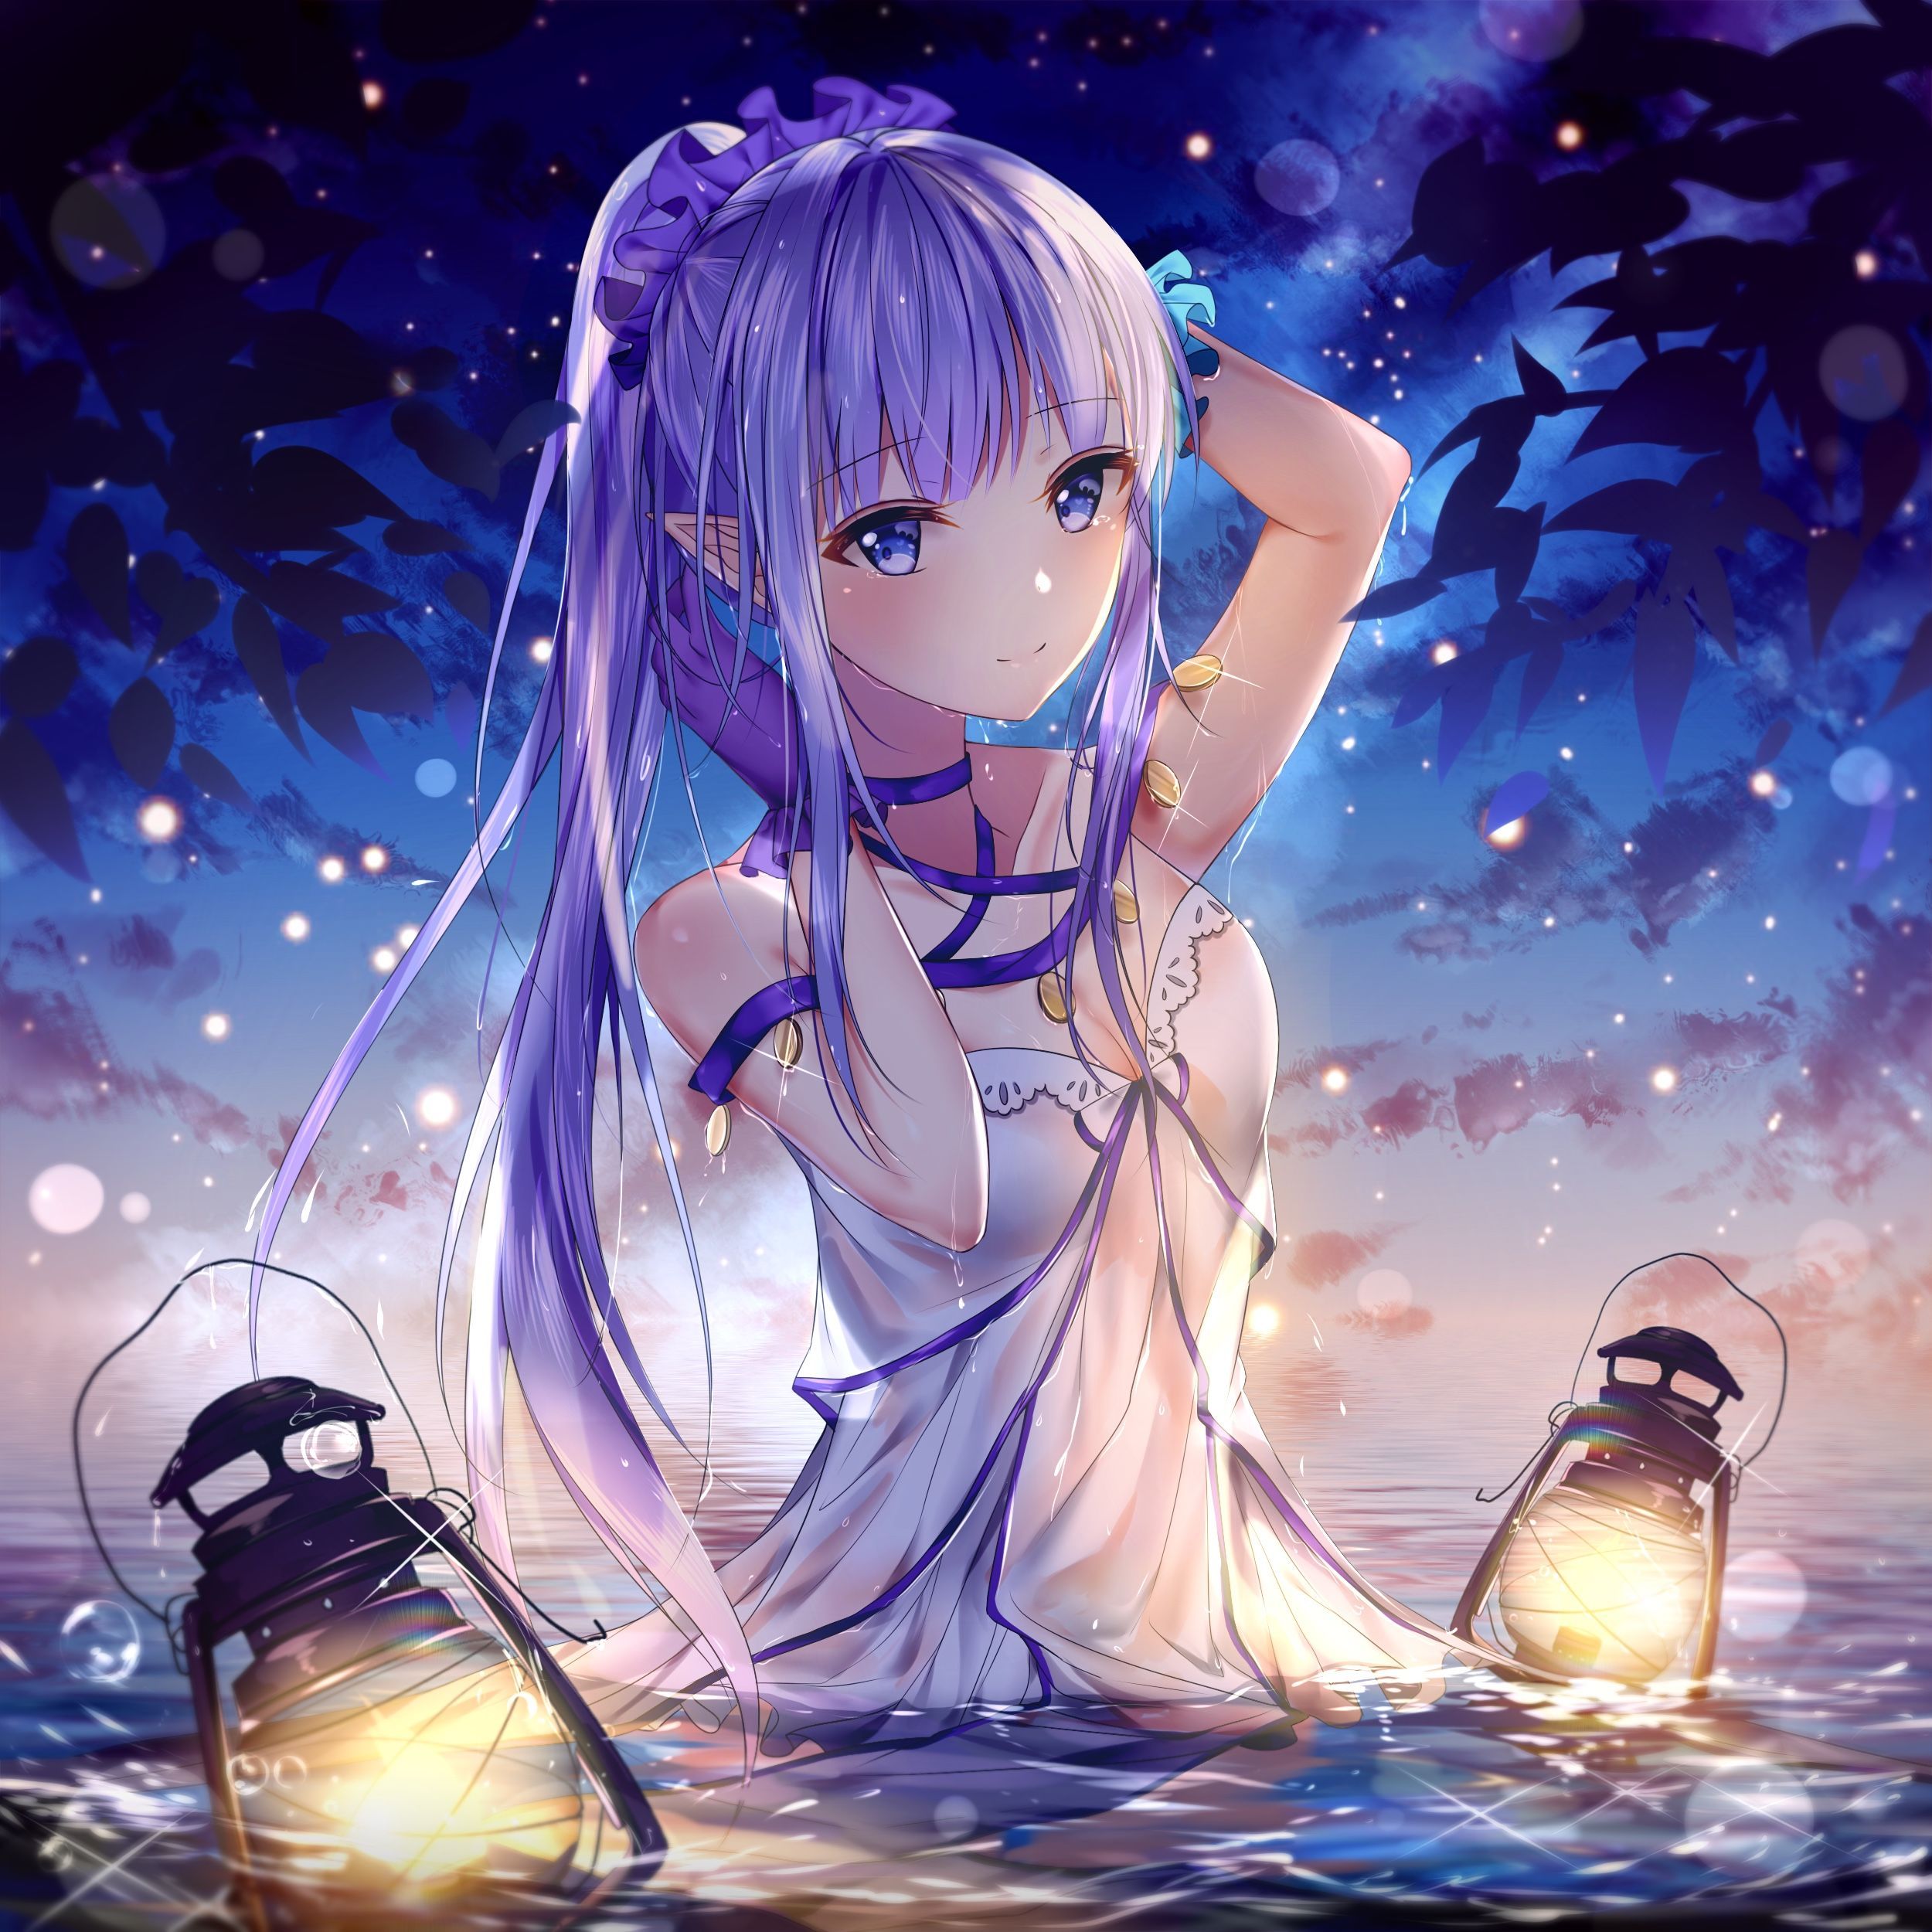 Lily Nightcore Wallpapers - Wallpaper Cave
